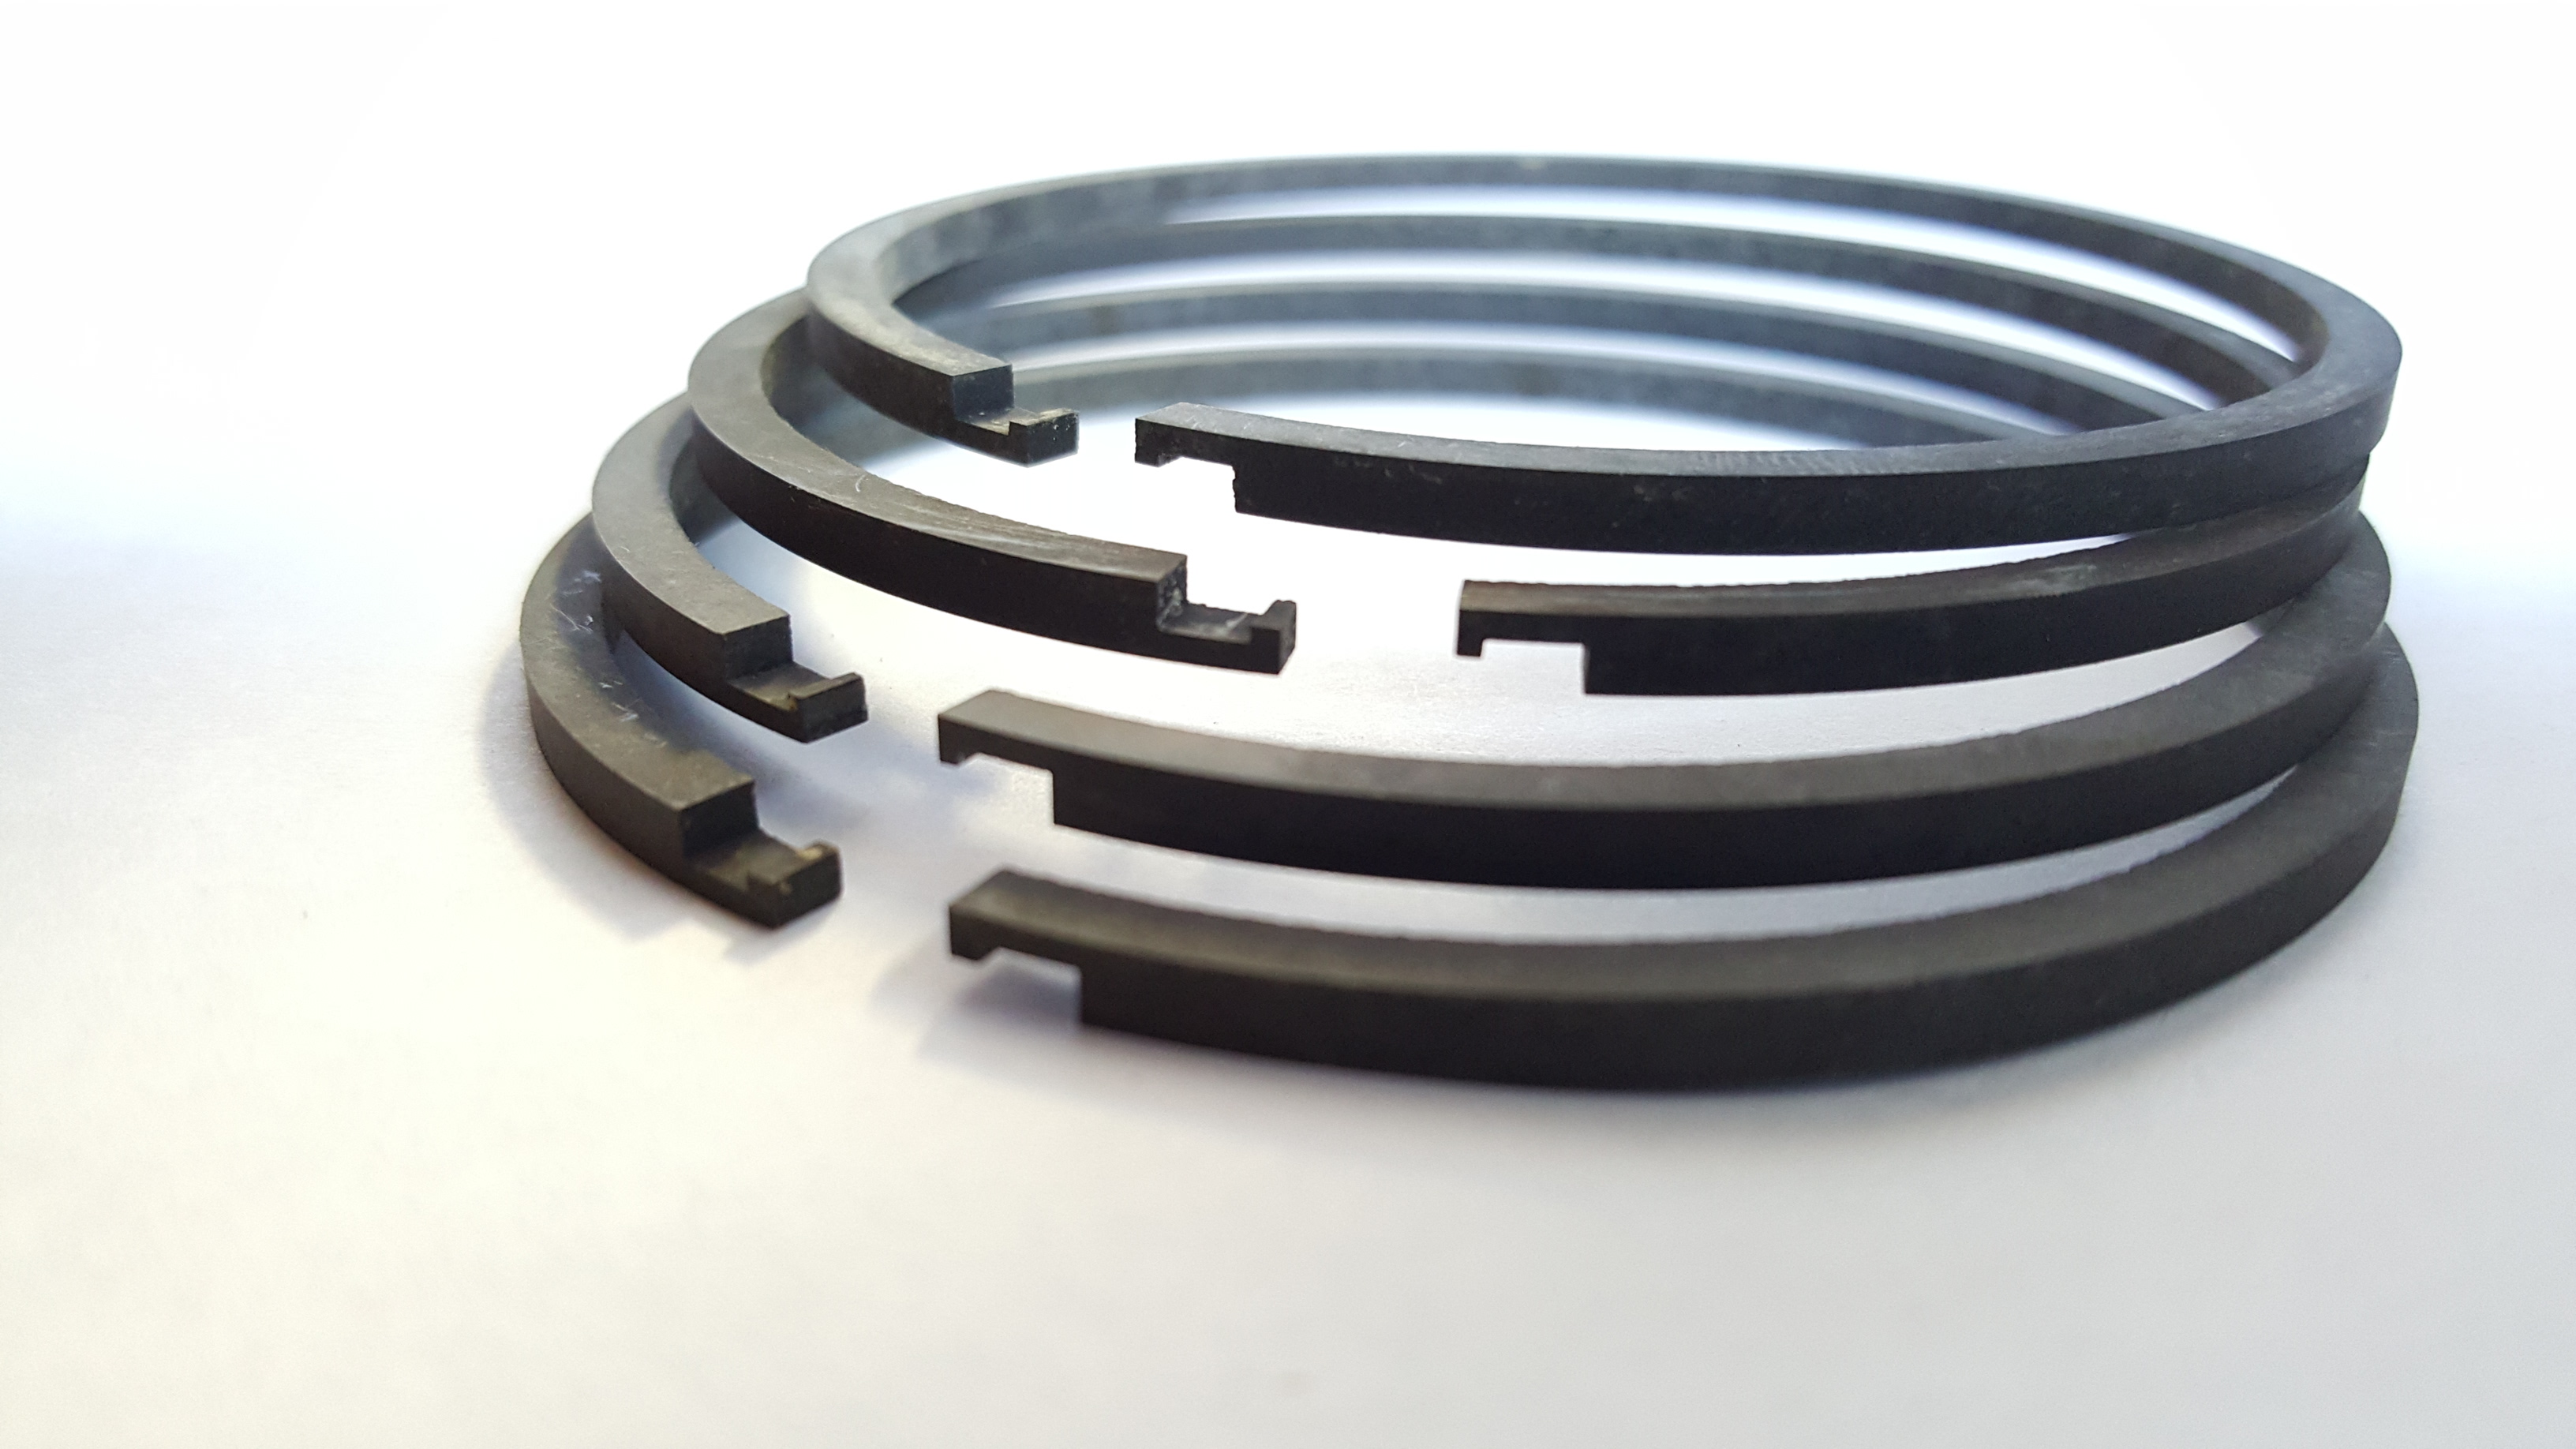 Hook Step piston ring joint configuration